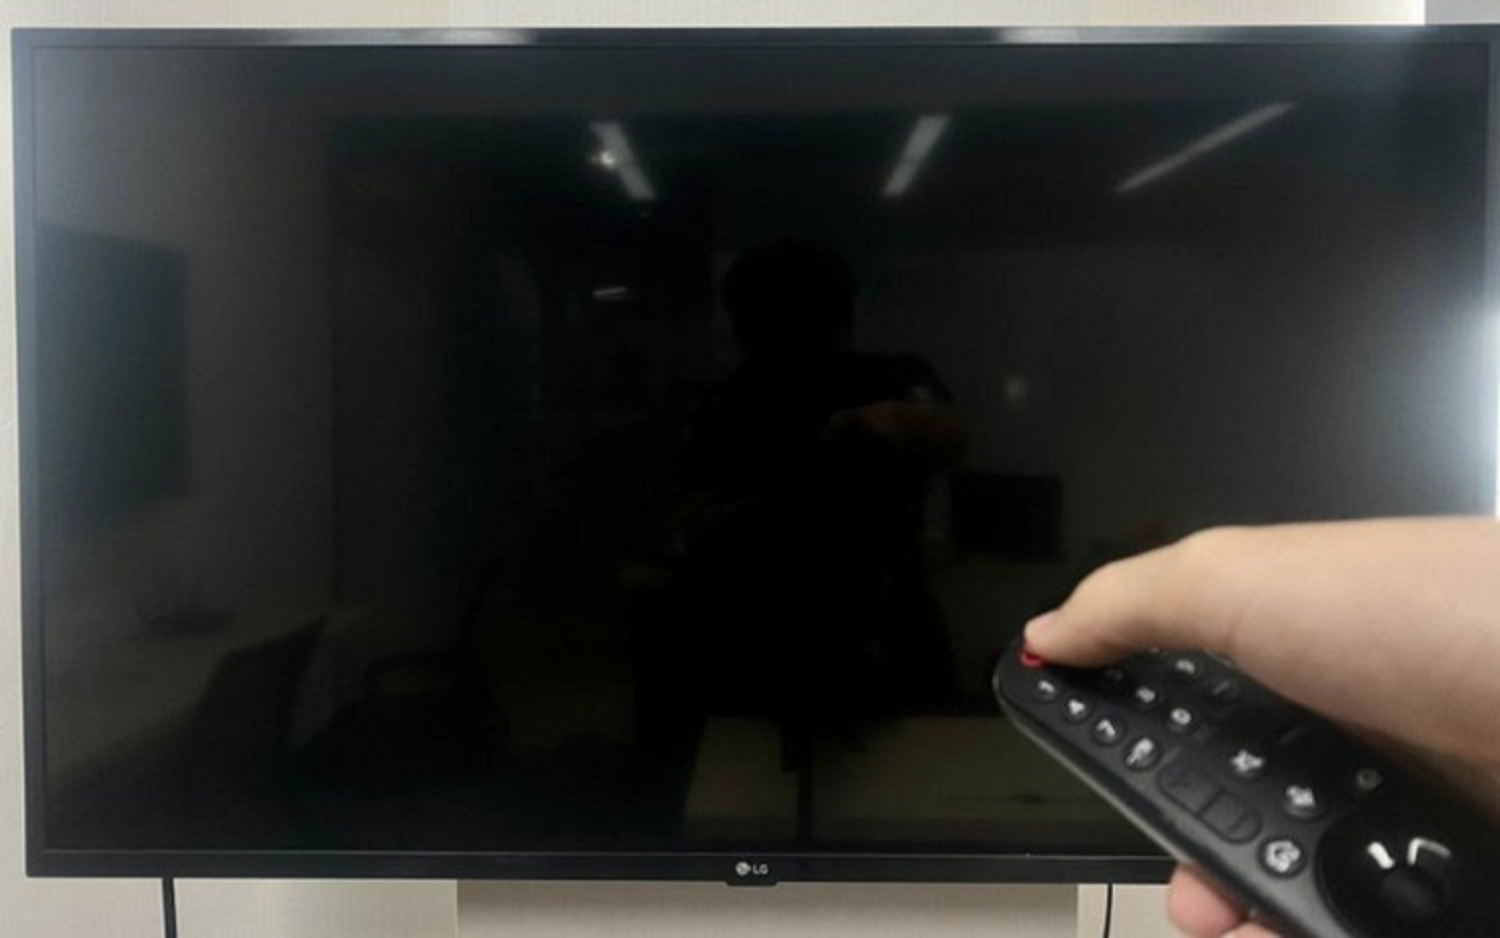 disconnect and reconnect the television